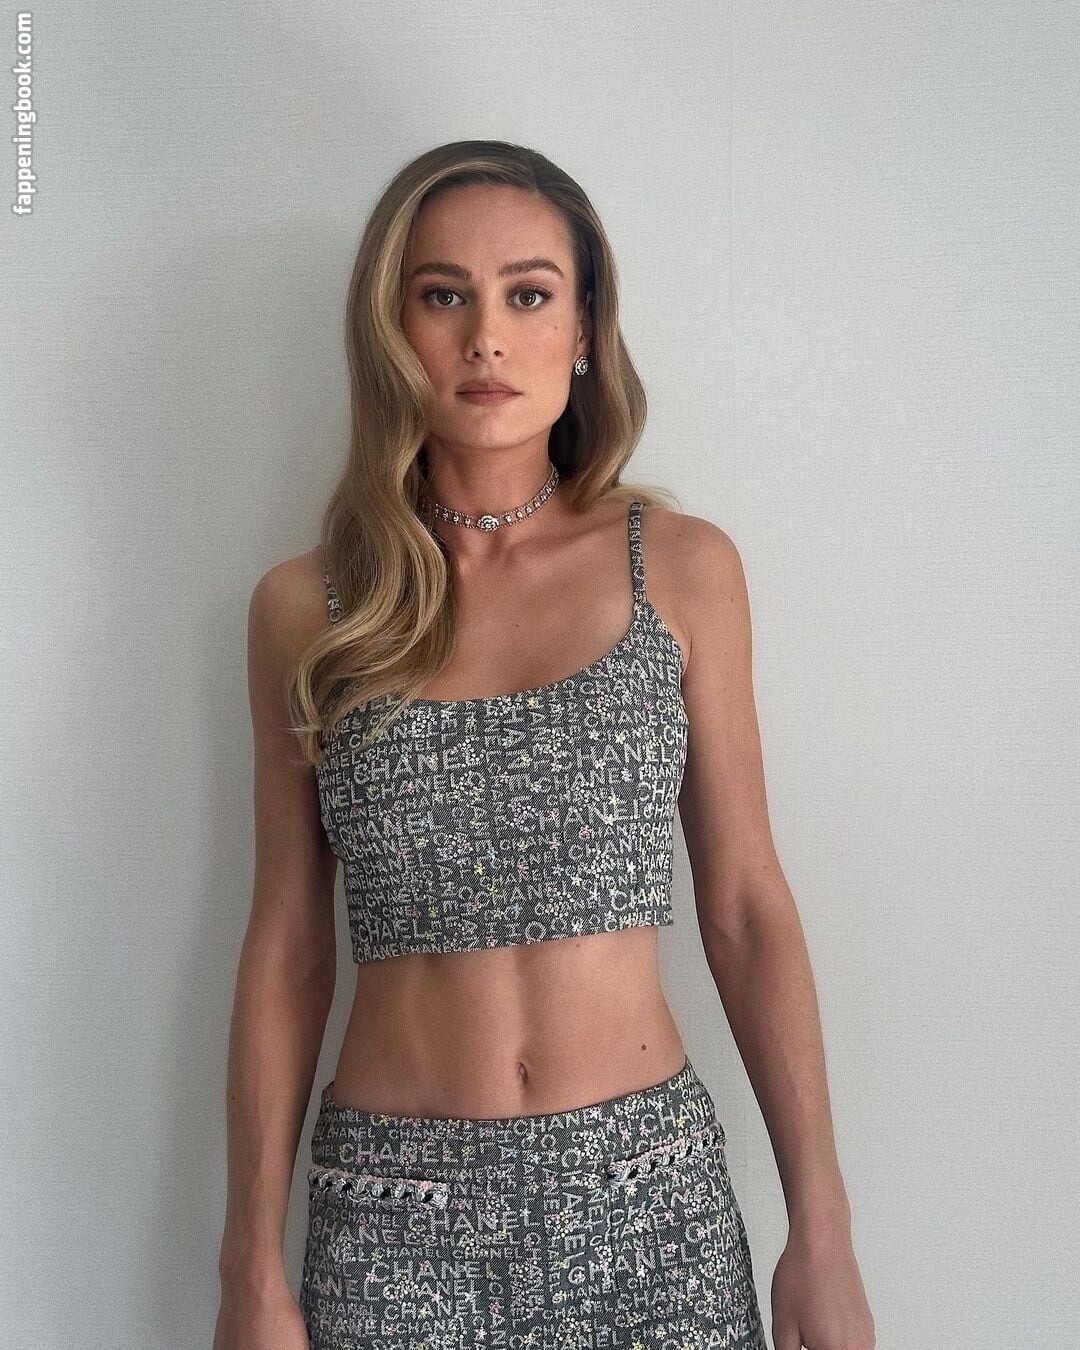 Brie Larson Finalgirleph Nude Onlyfans Leaks The Fappening Photo Fappeningbook